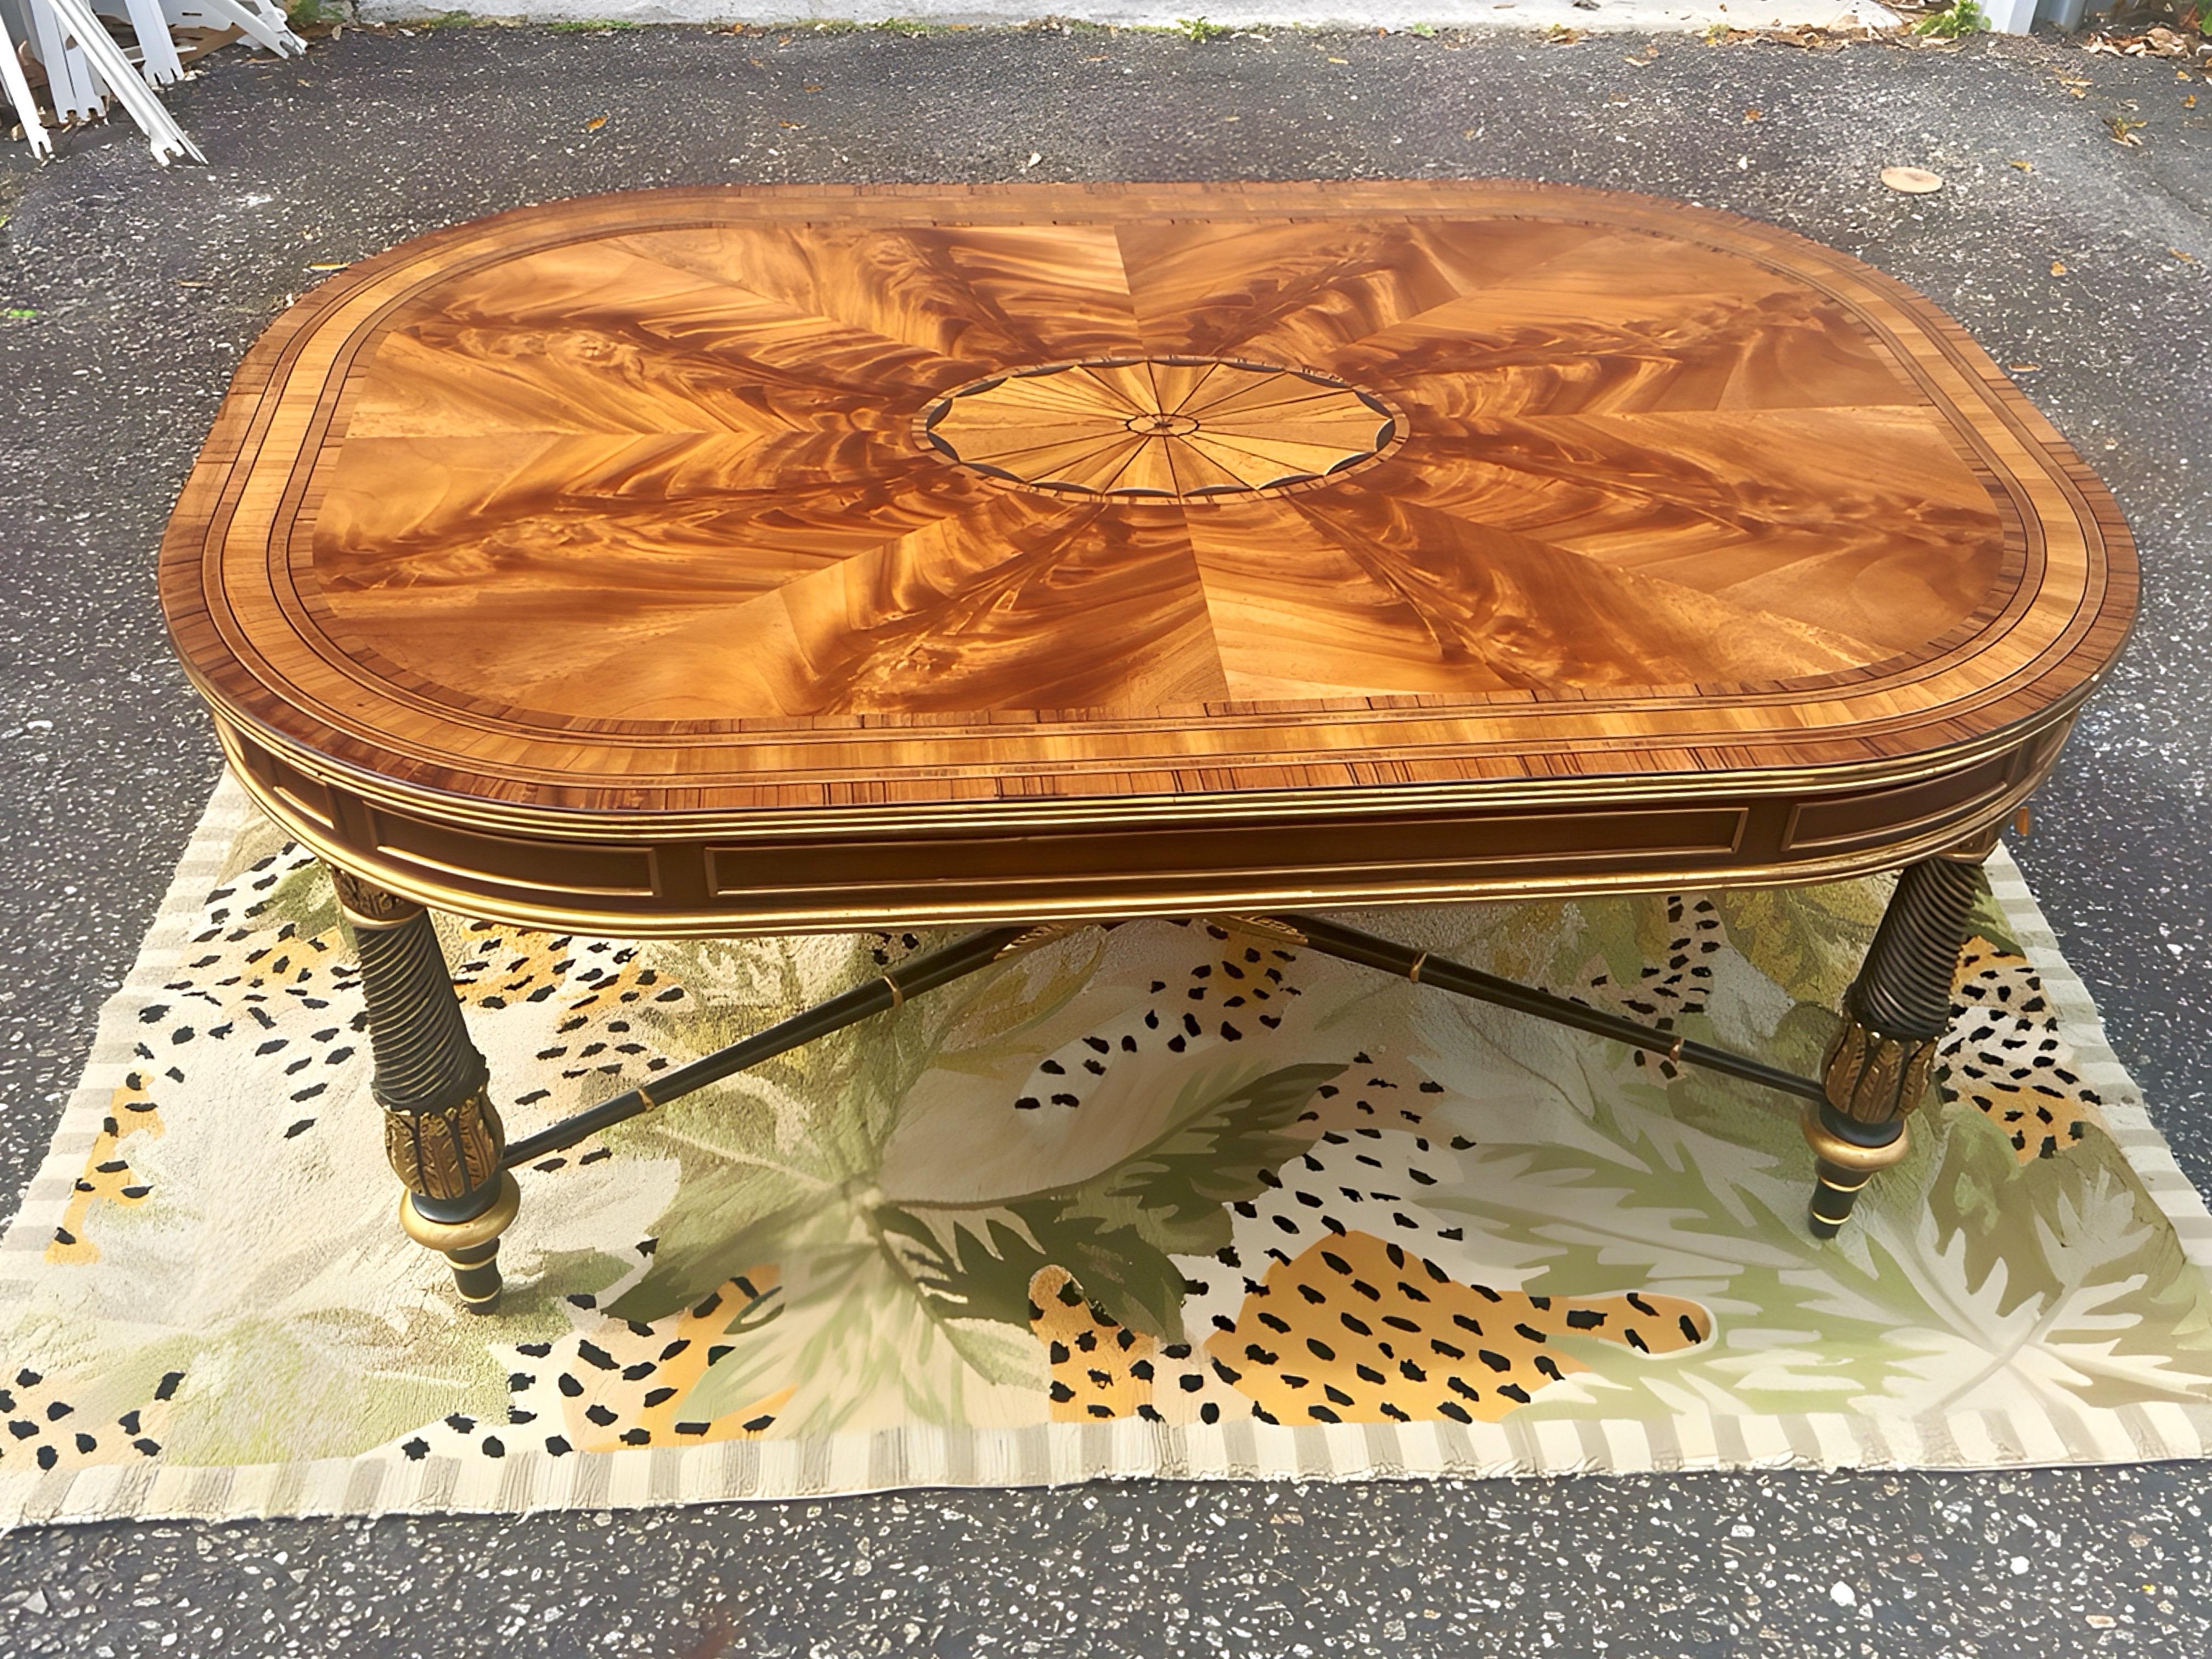 Absolutely gorgeous E.J Victor Regency Style Ebonized and Parcel Gilt Marquetry Inlaid Coffee Table. Features Flame mahogany top with a large center medallion inlaid with satinwood. Gilt decorated Mahogany apron. Very solid construction with large